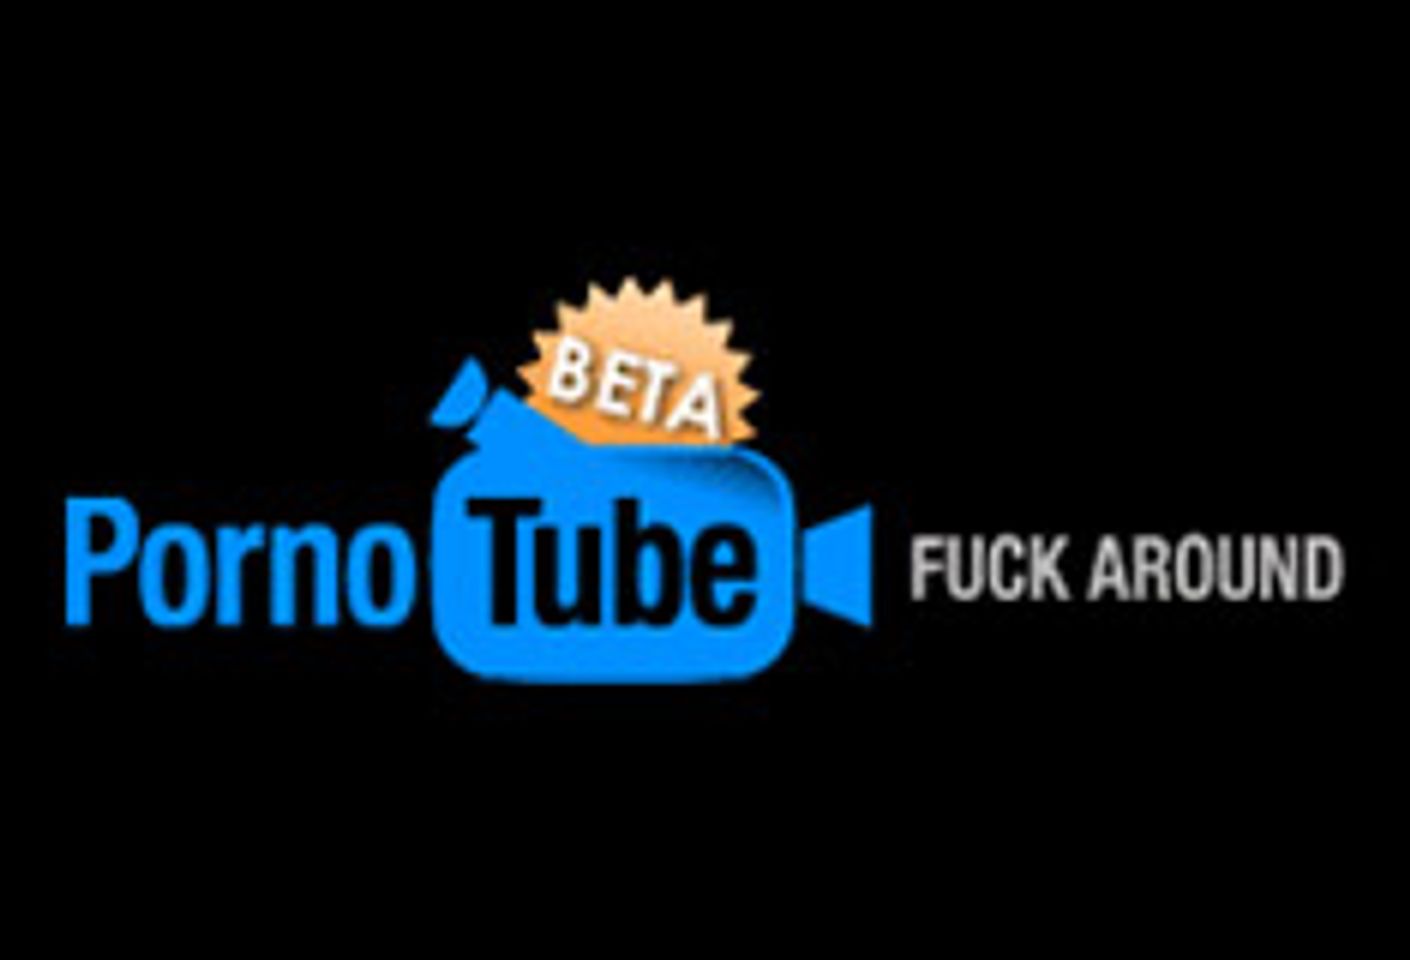 PornoTube is Launched